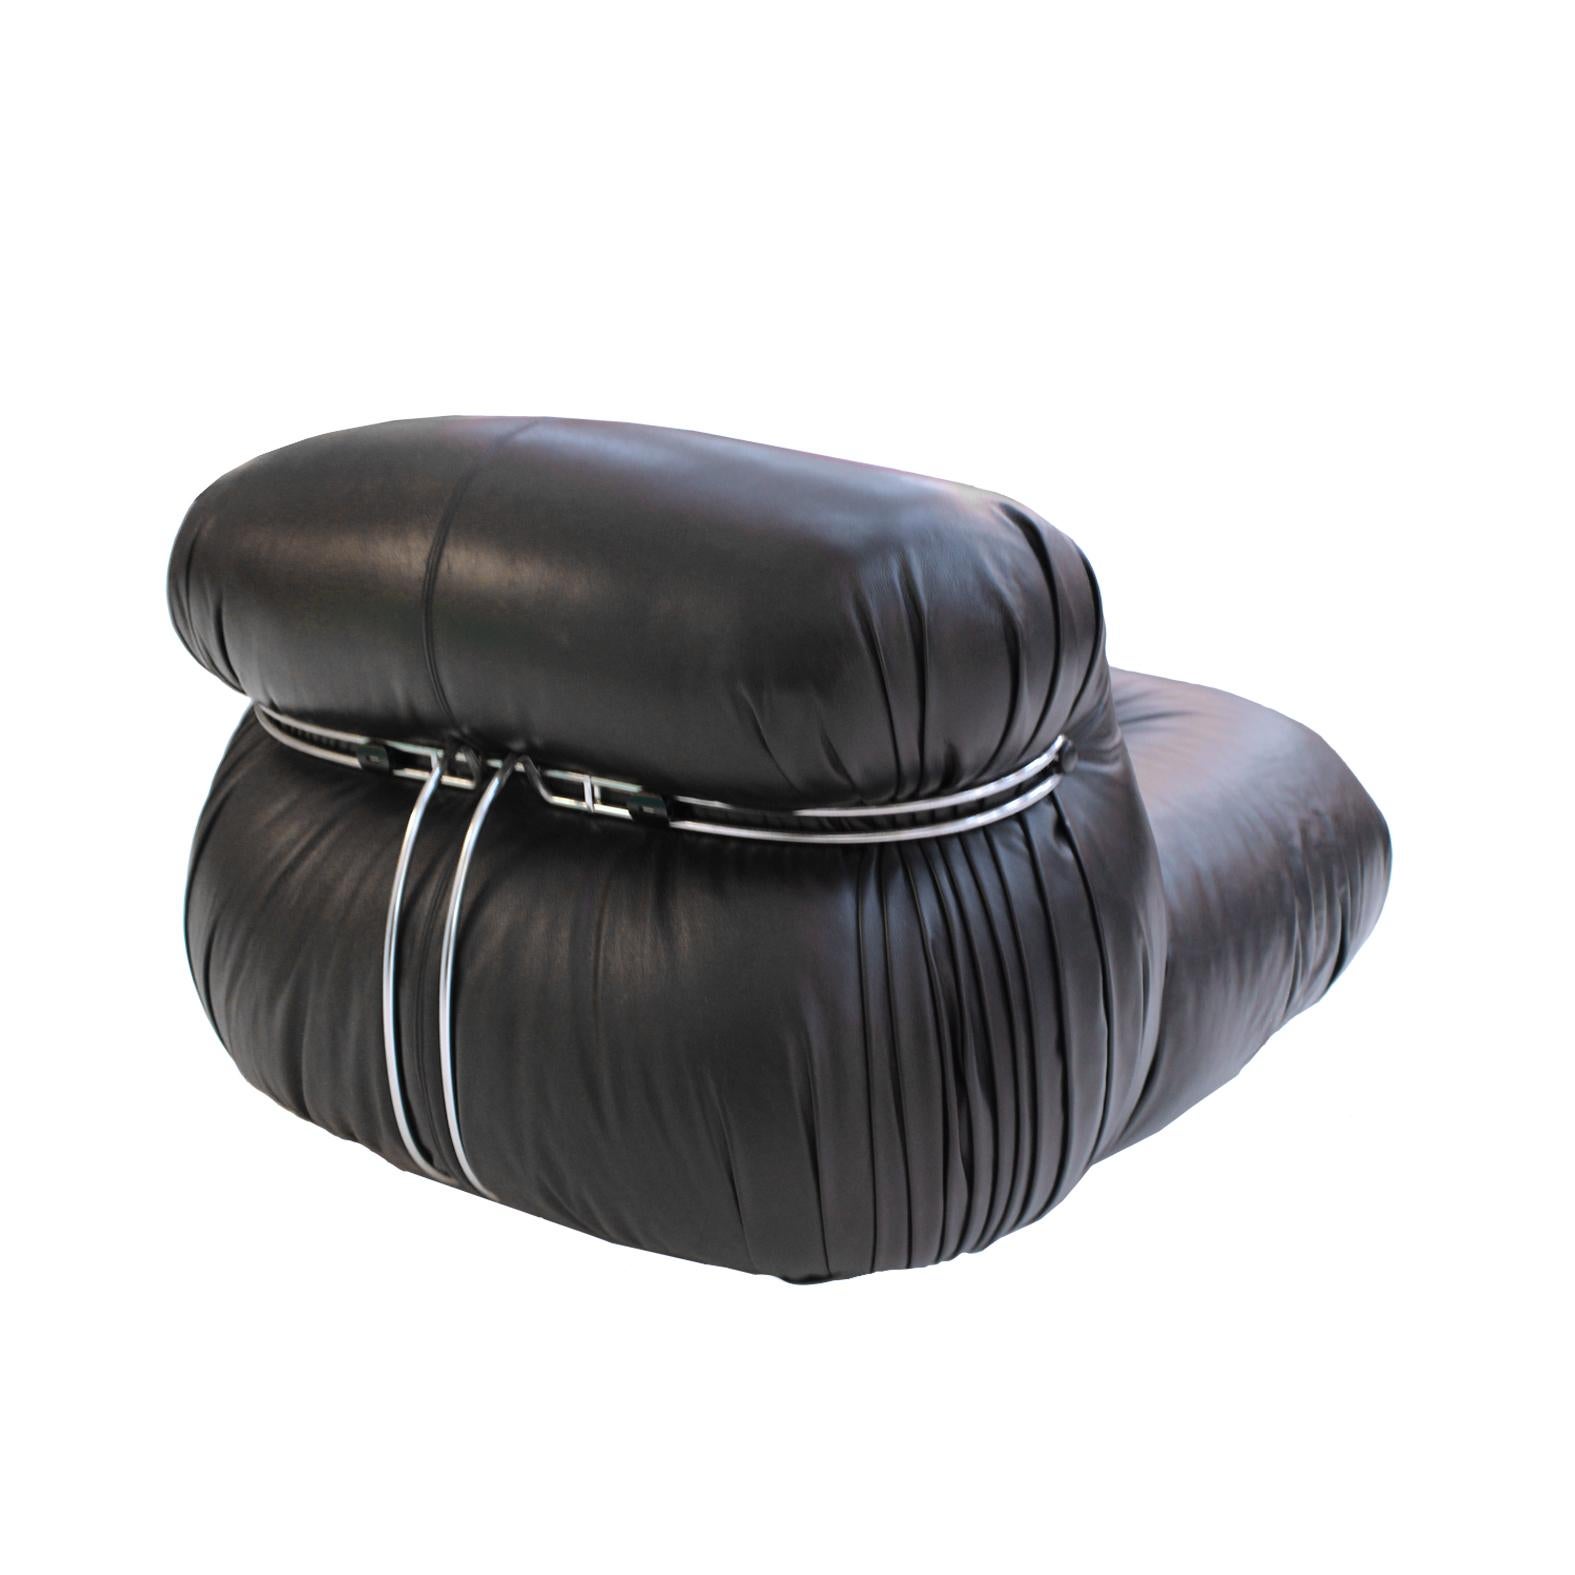 Steel Midcentury Modern Pair of Black Leather Soriana Lounge Chairs by Tobia Scarpa For Sale